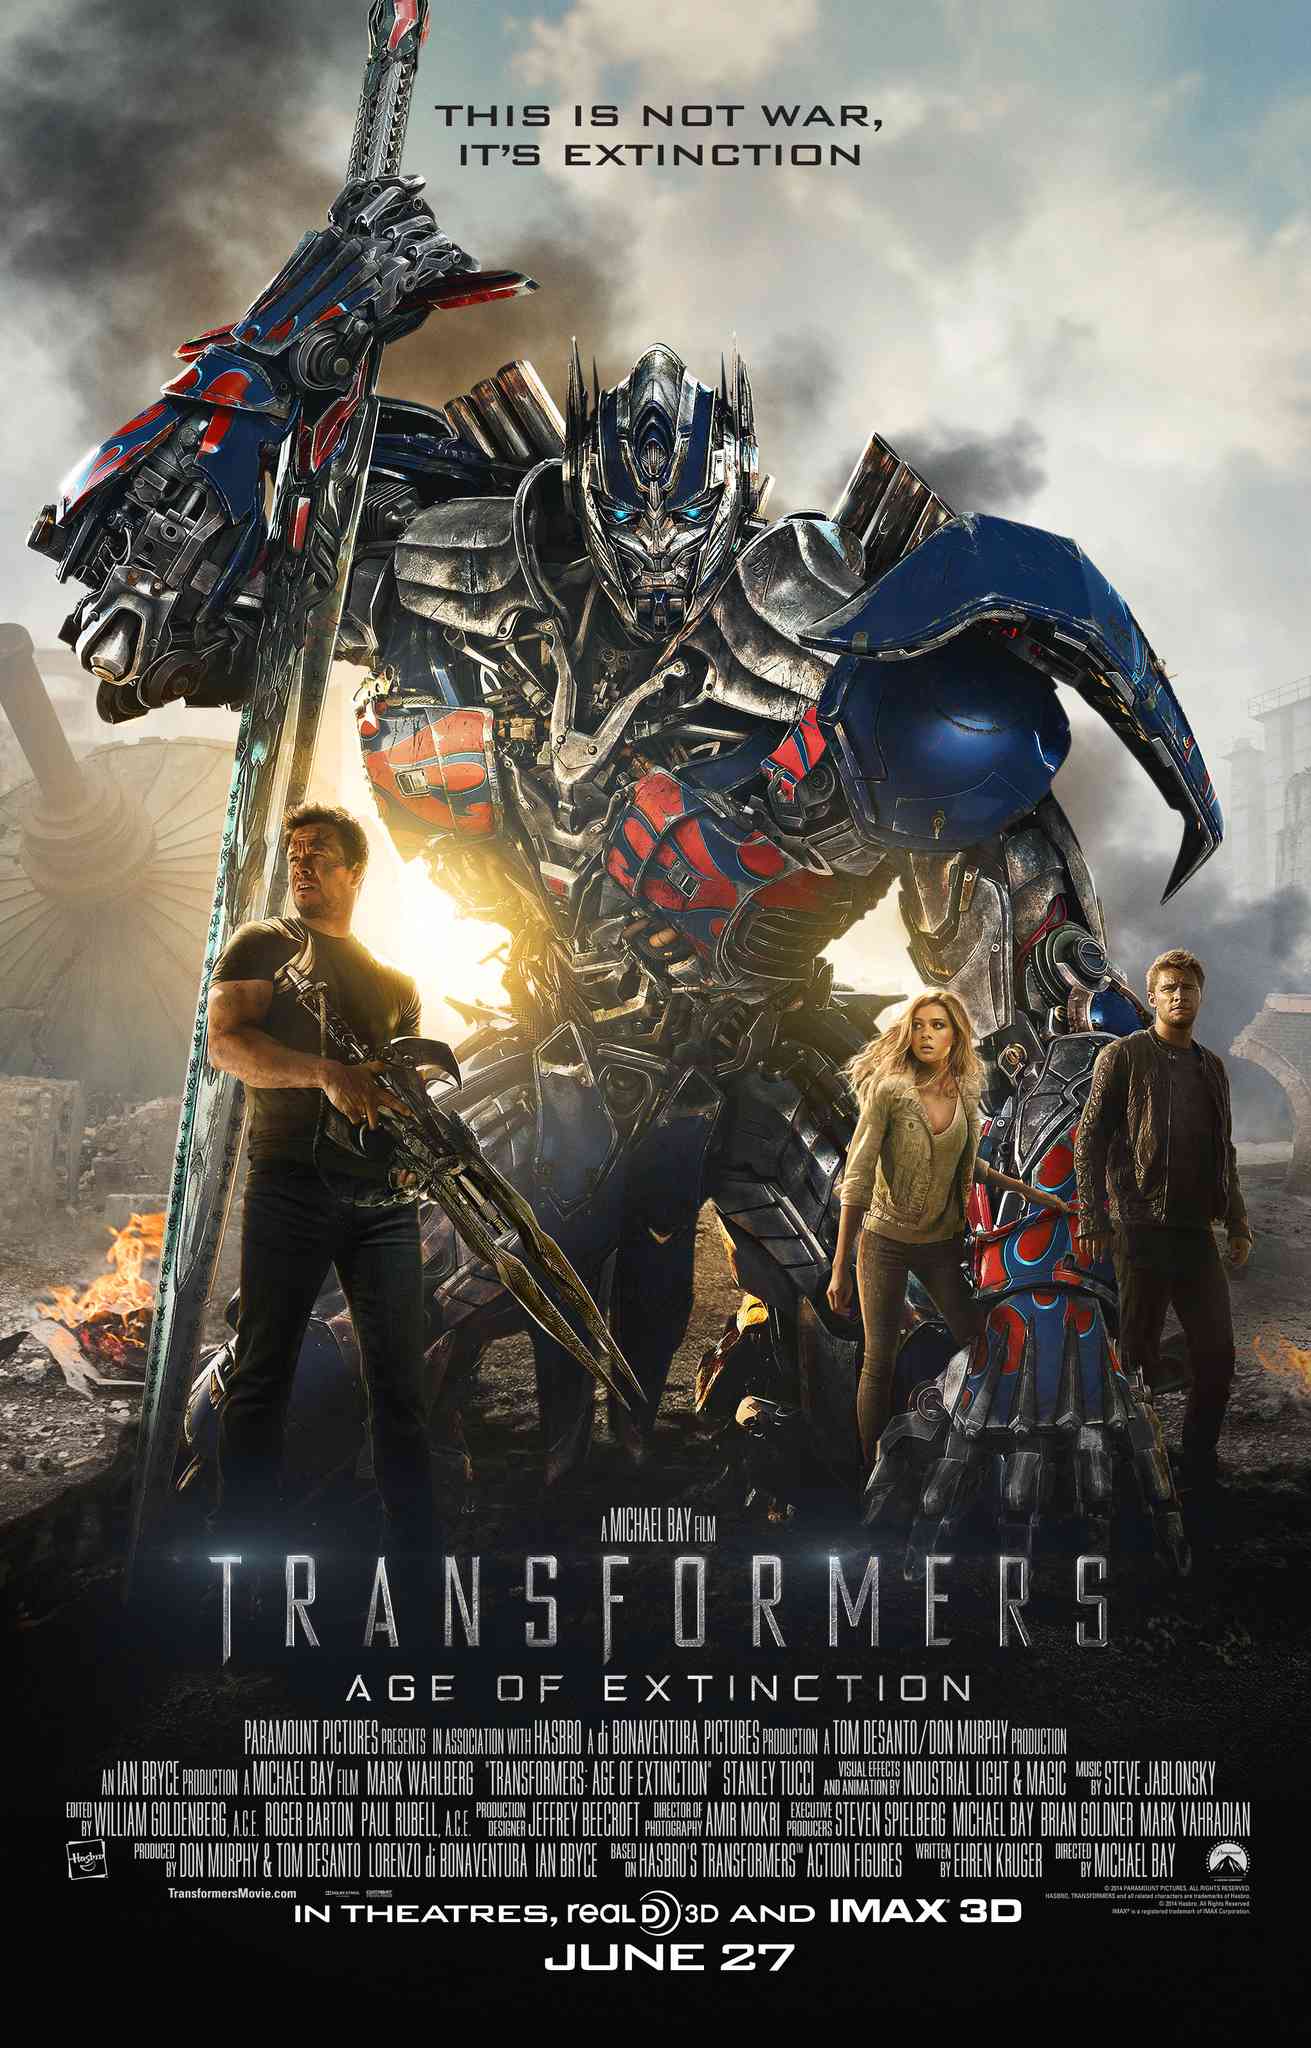 FULL MOVIE: Transformers 4: Age Of Extinction (2014) [Action]